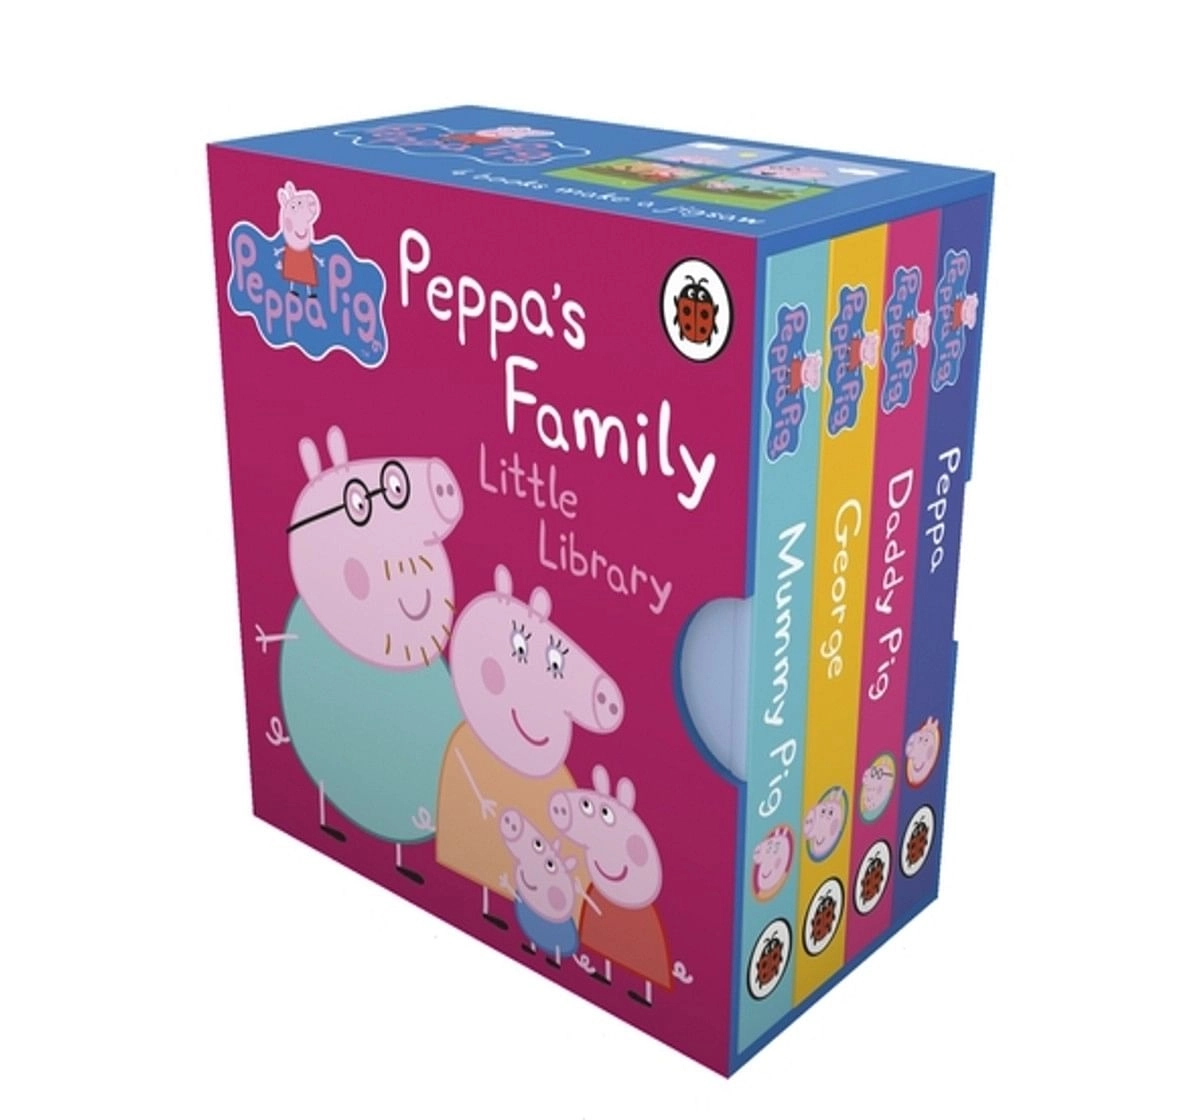 Peppa Pig: PeppaÆs Family Little Library, 48 Pages Book by Ladybird, Board Book